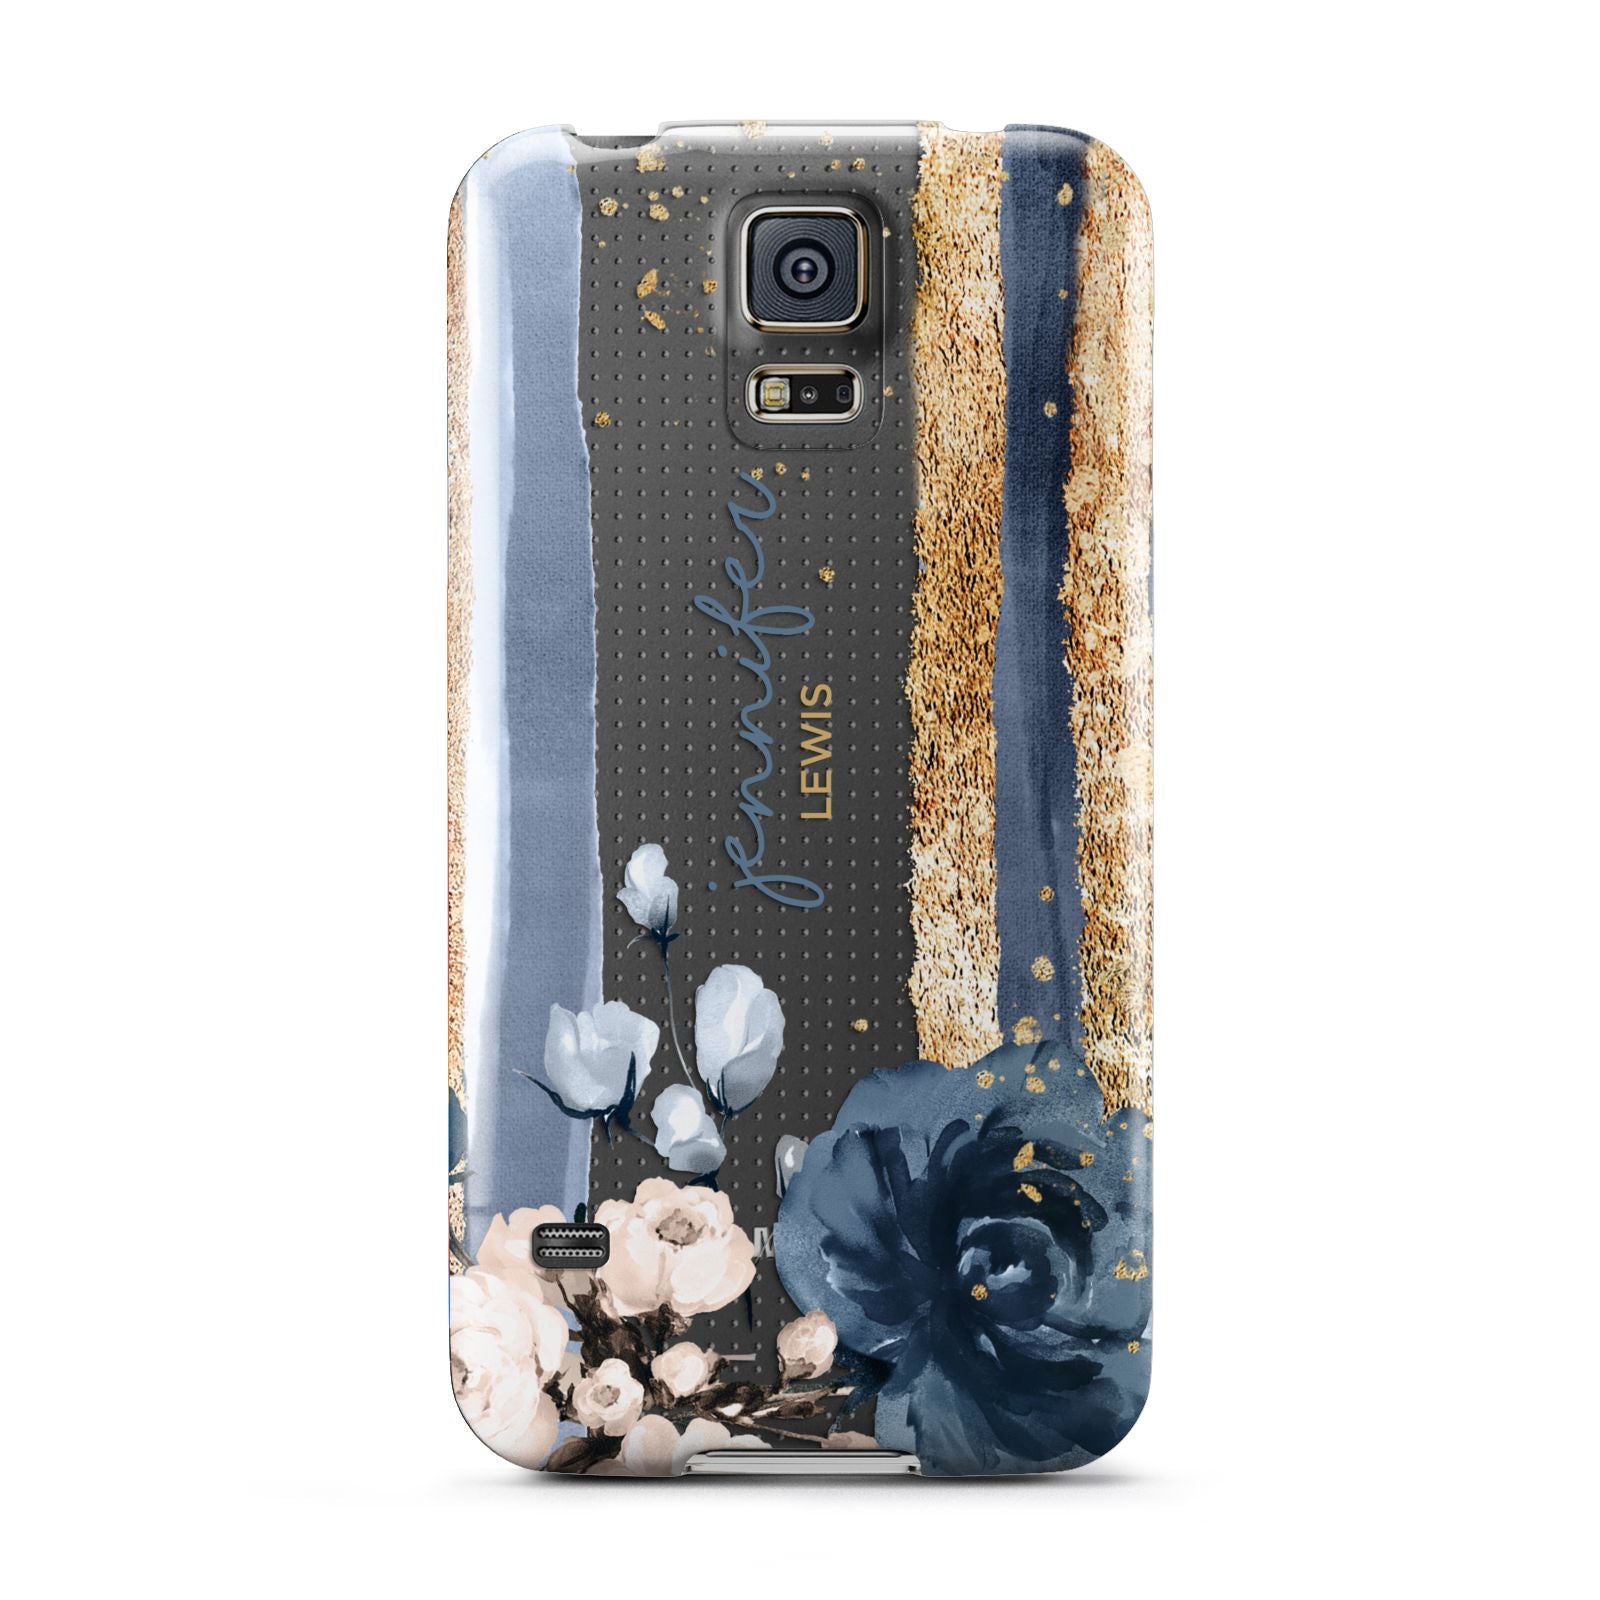 Personalised Blue Gold Name Samsung Galaxy S5 Case